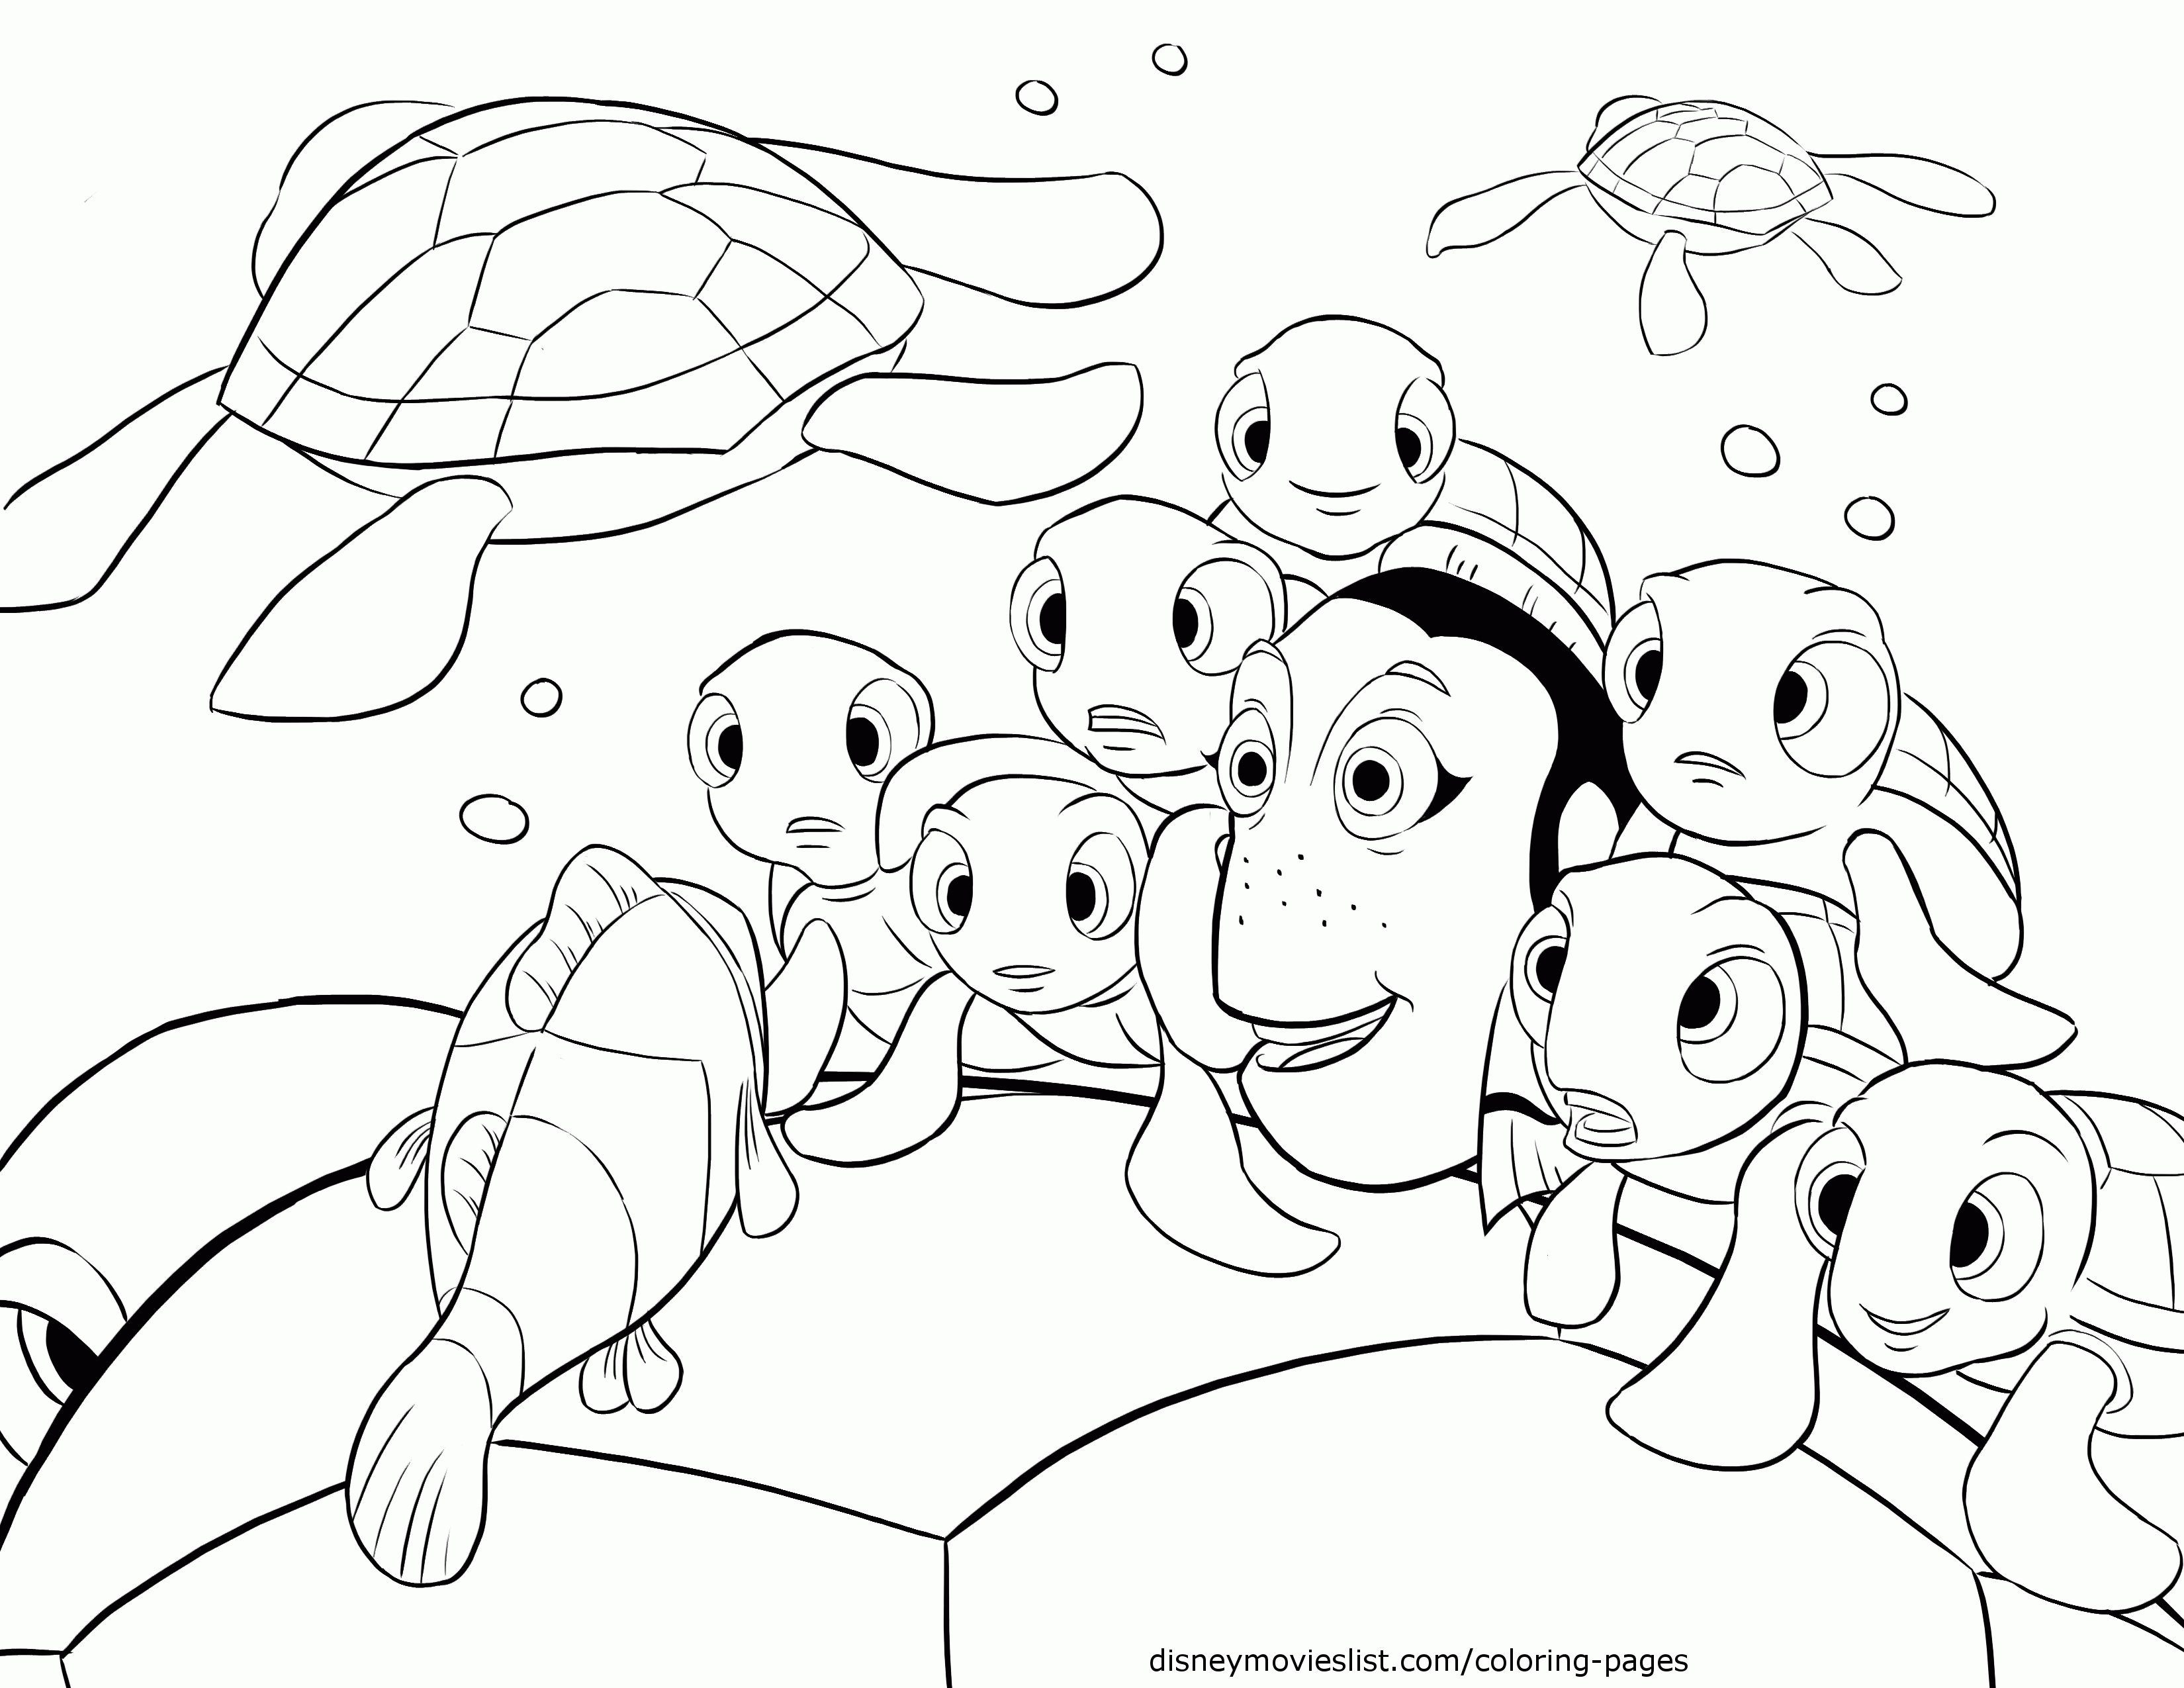 13 Pics of Nigel Finding Nemo Coloring Pages - Dory Finding Nemo ...